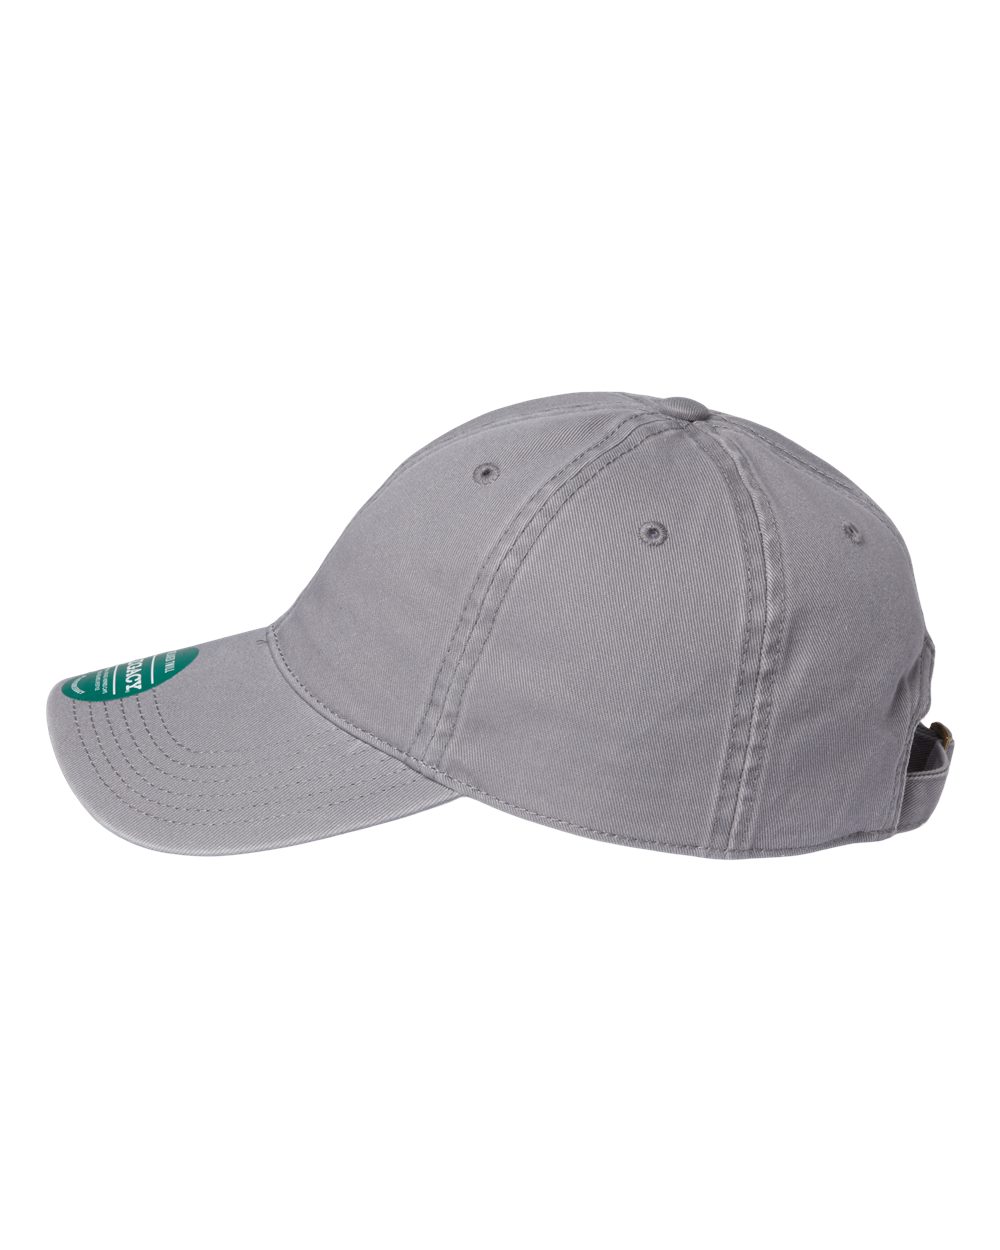 FREIGHT TRAIN LACROSSE CLUB "THE FERRICK" DAD HAT - GRAY